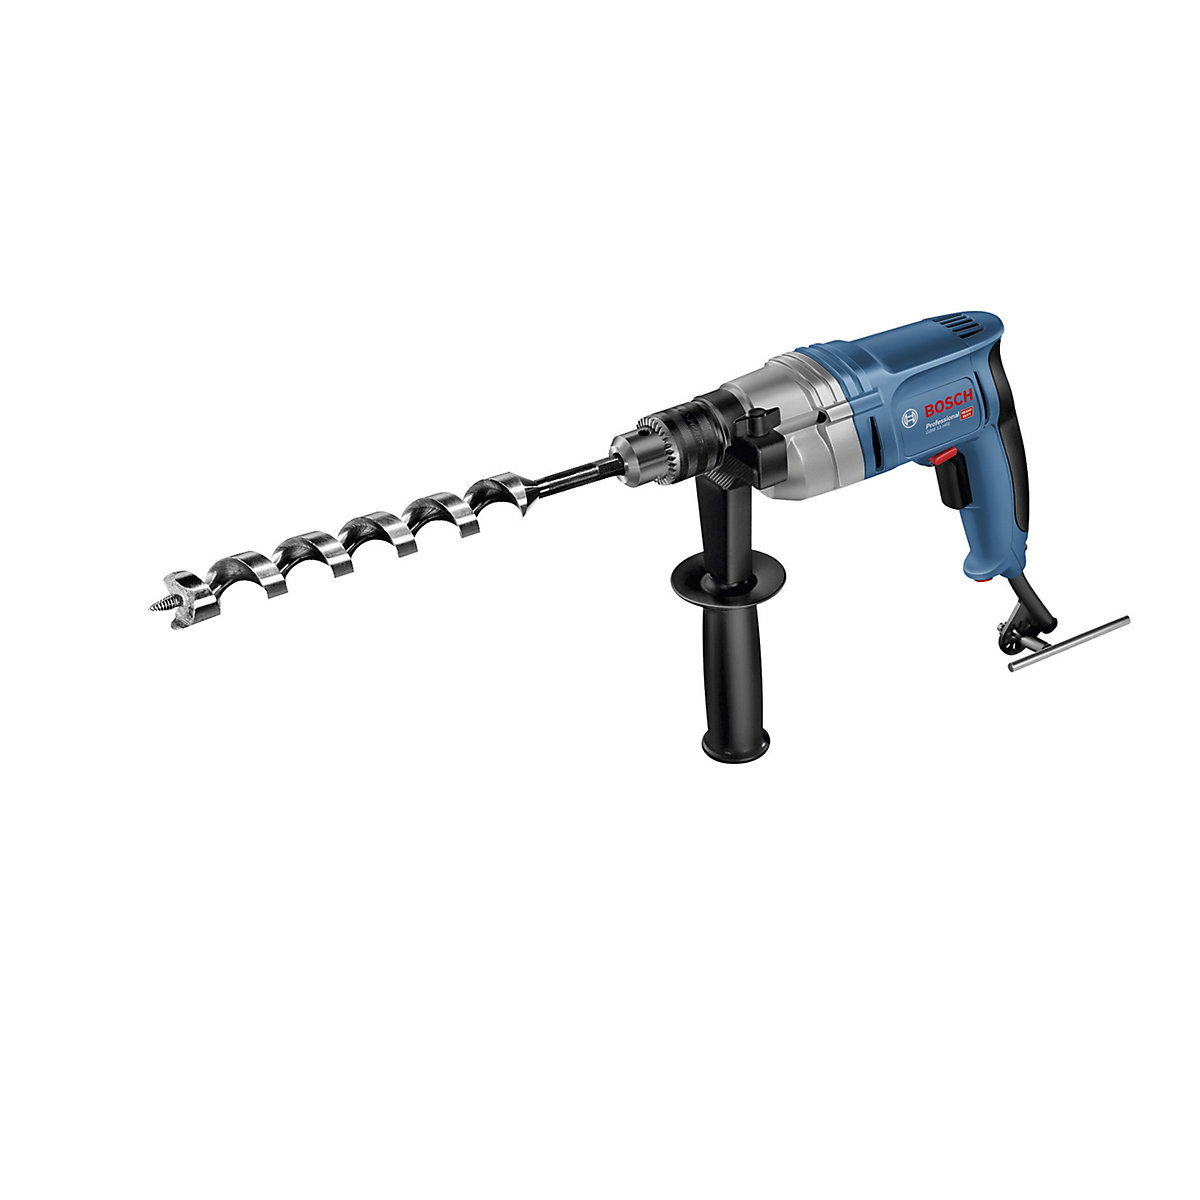 Perceuse GBM 13 HRE Professional – Bosch